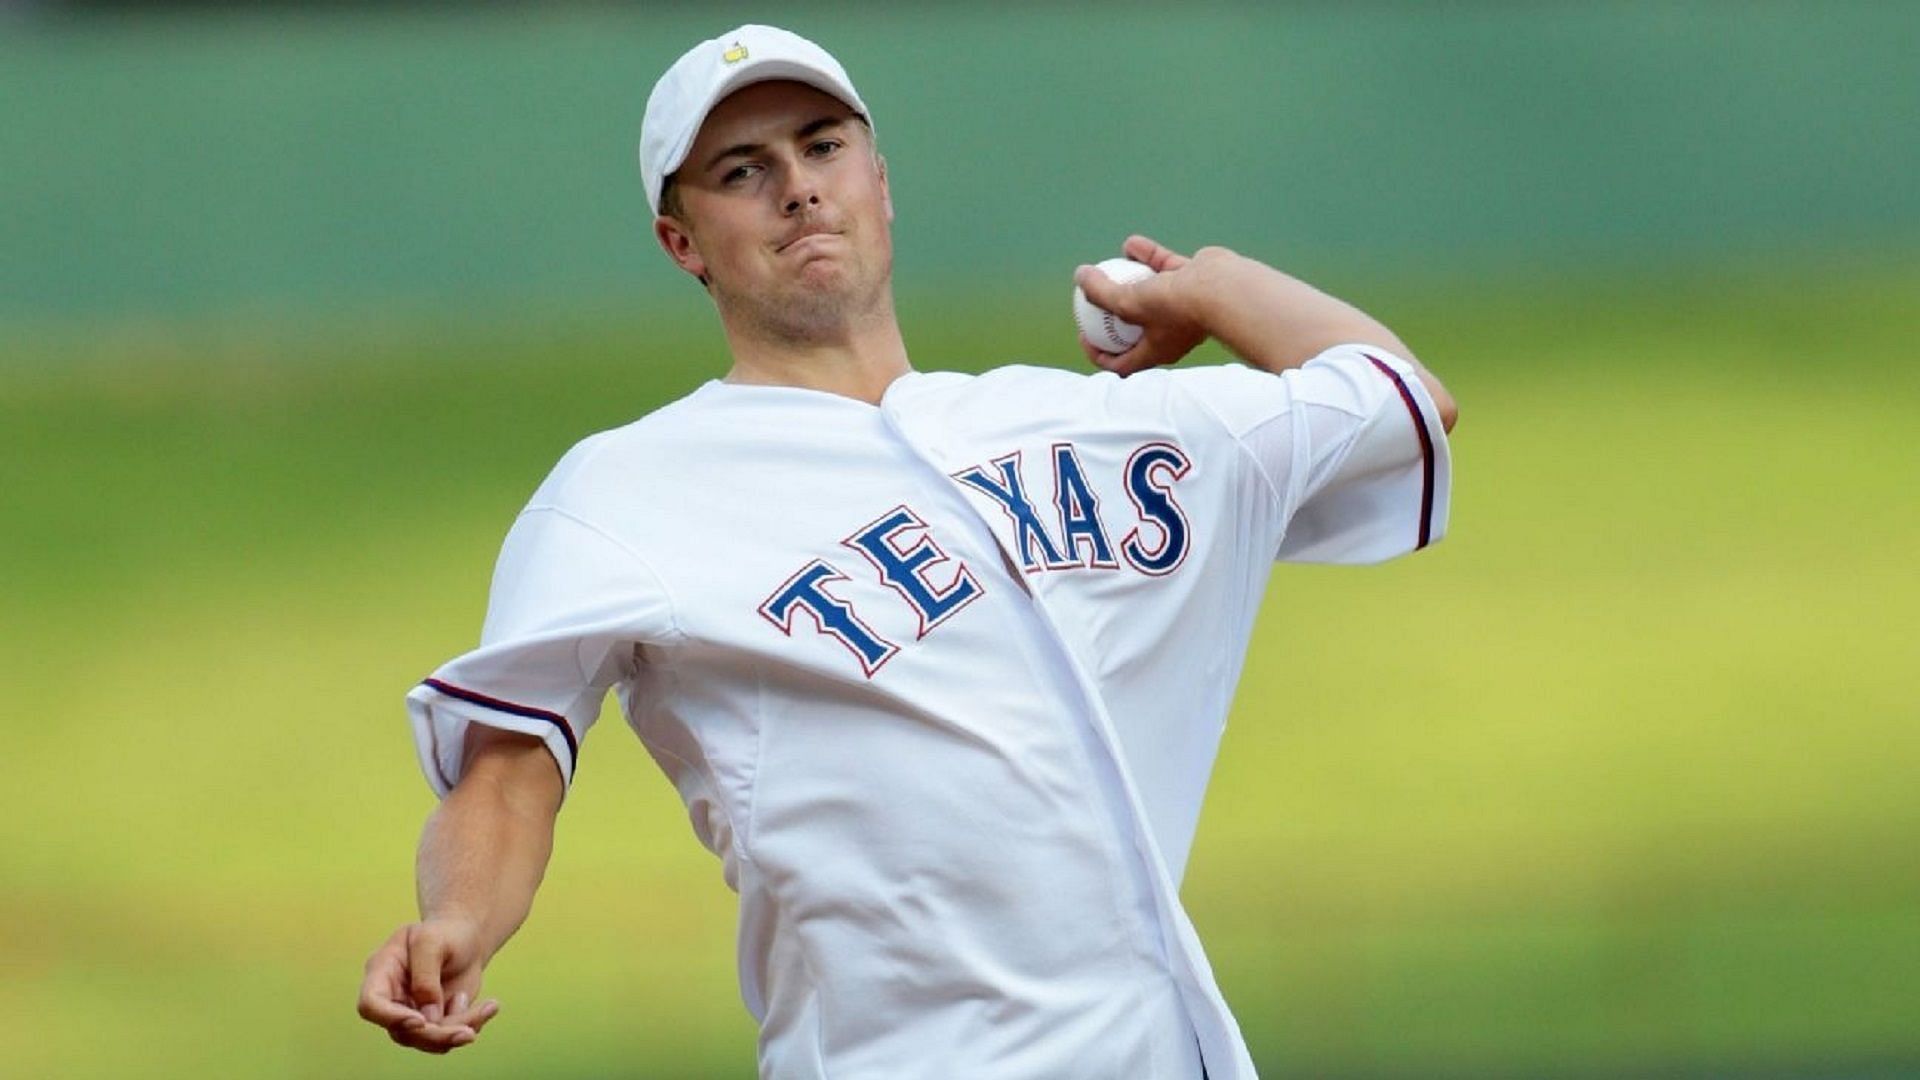 Jordan Spieth threw first pitch for the Texas Rangers in 2015 (Image via ESPN)